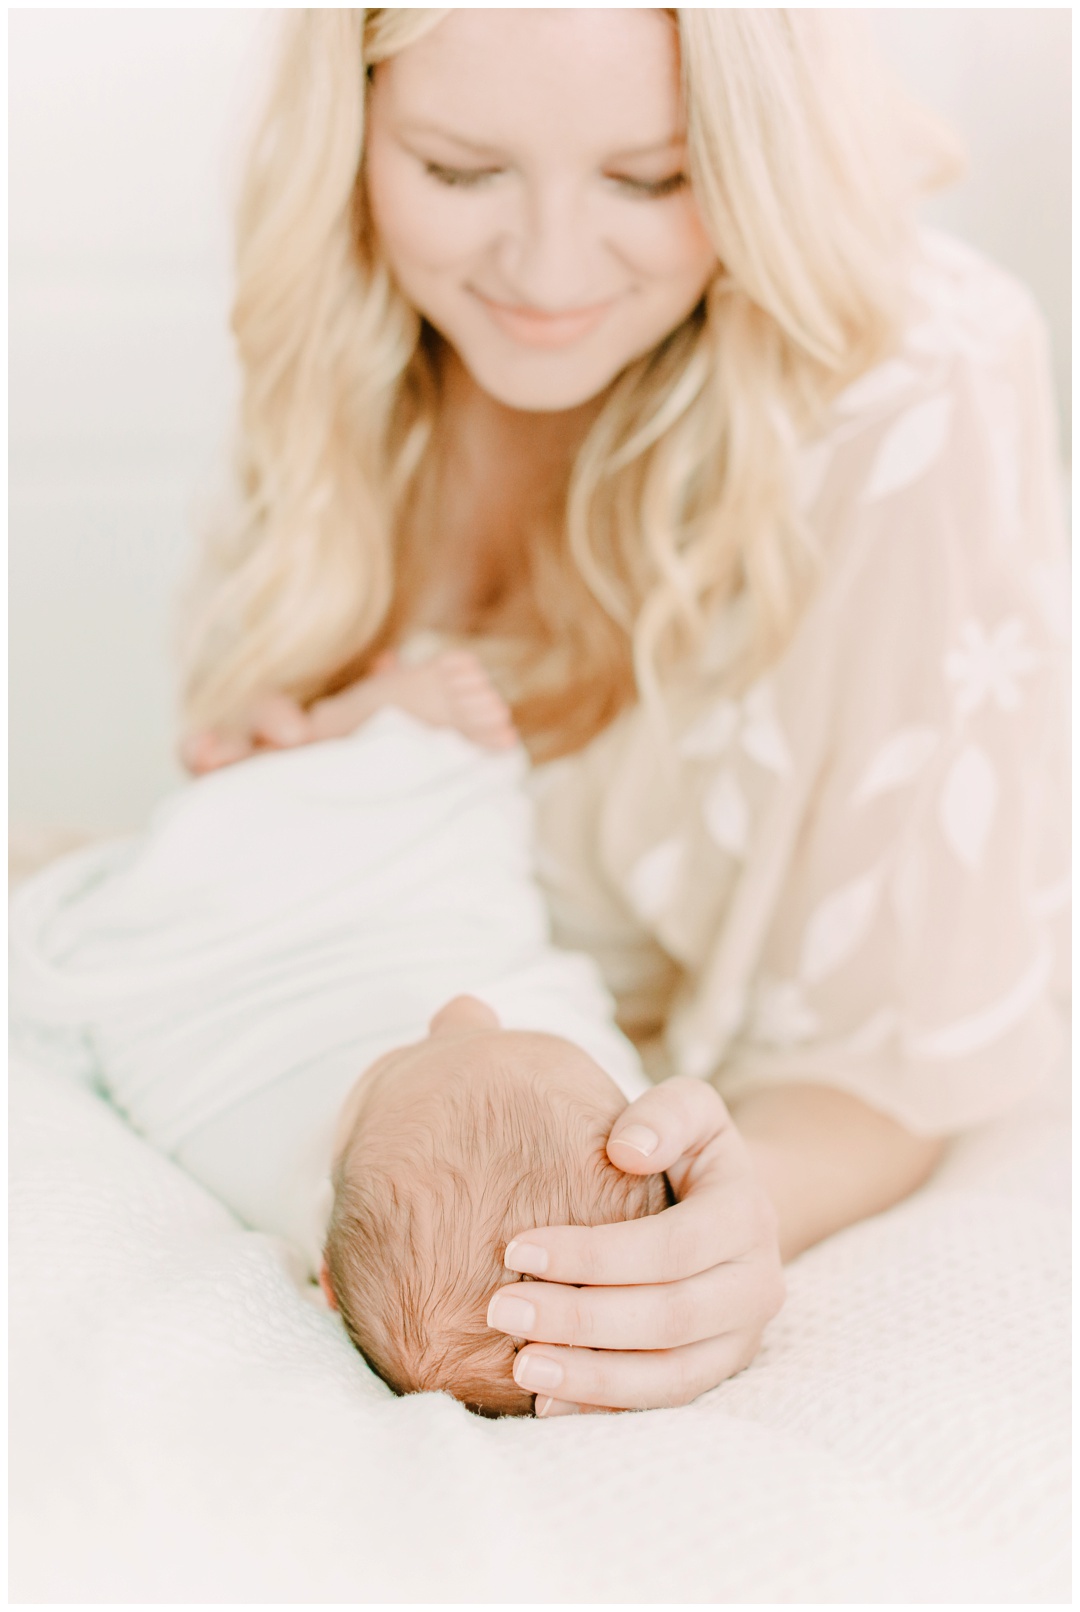 The_Moore's_Family_Newport_Beach_Lifestyle_Family_Photographer_Orange_County_Family_Photography_Cori_Kleckner_Photography_Orange_County_Newborn_Photographer_Family_Photos_Session__1395.jpg